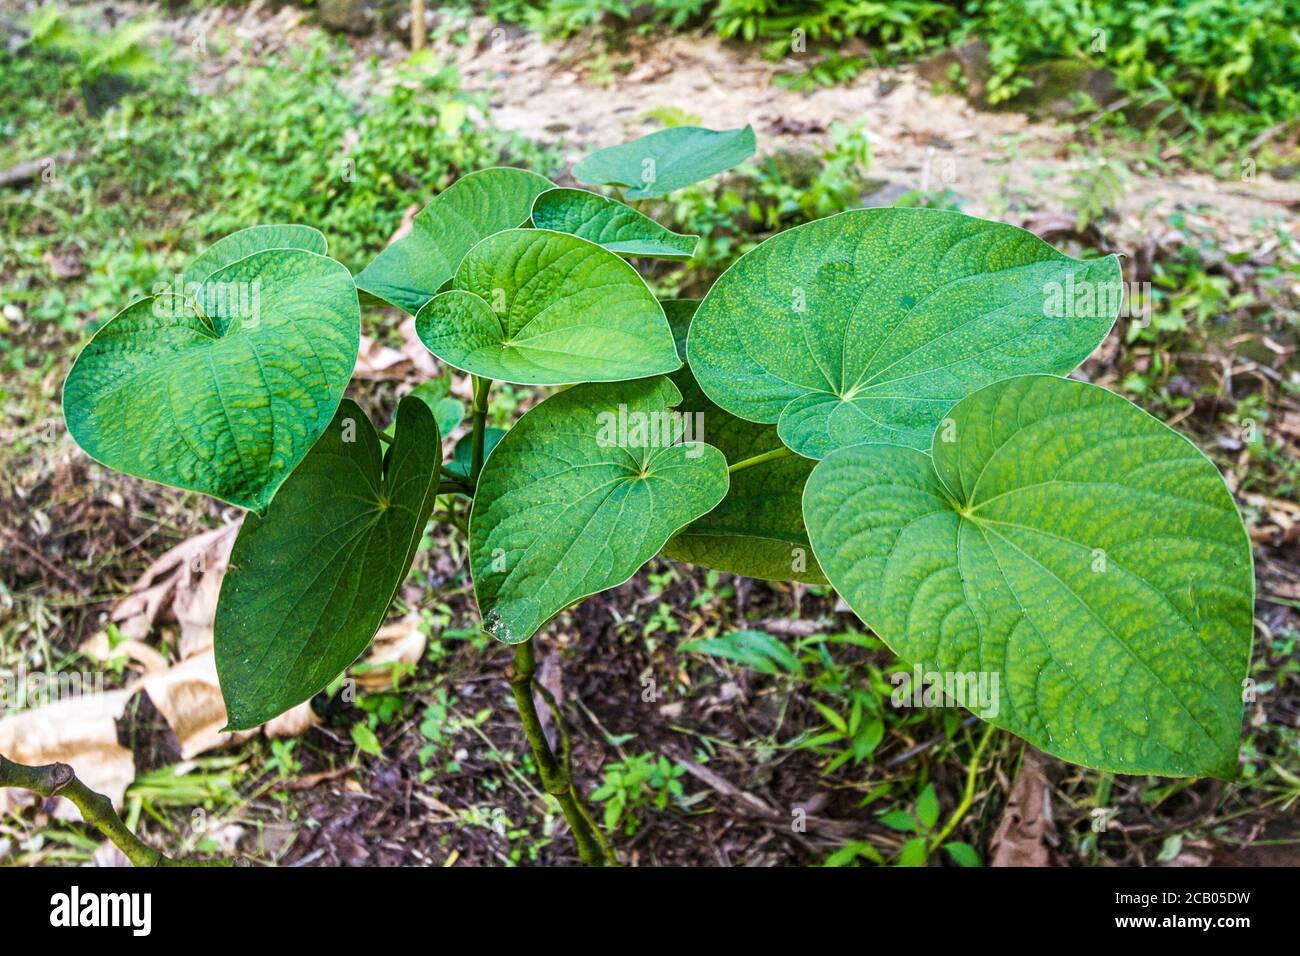 Kava Plant High Resolution Stock Photography and Images - Alamy